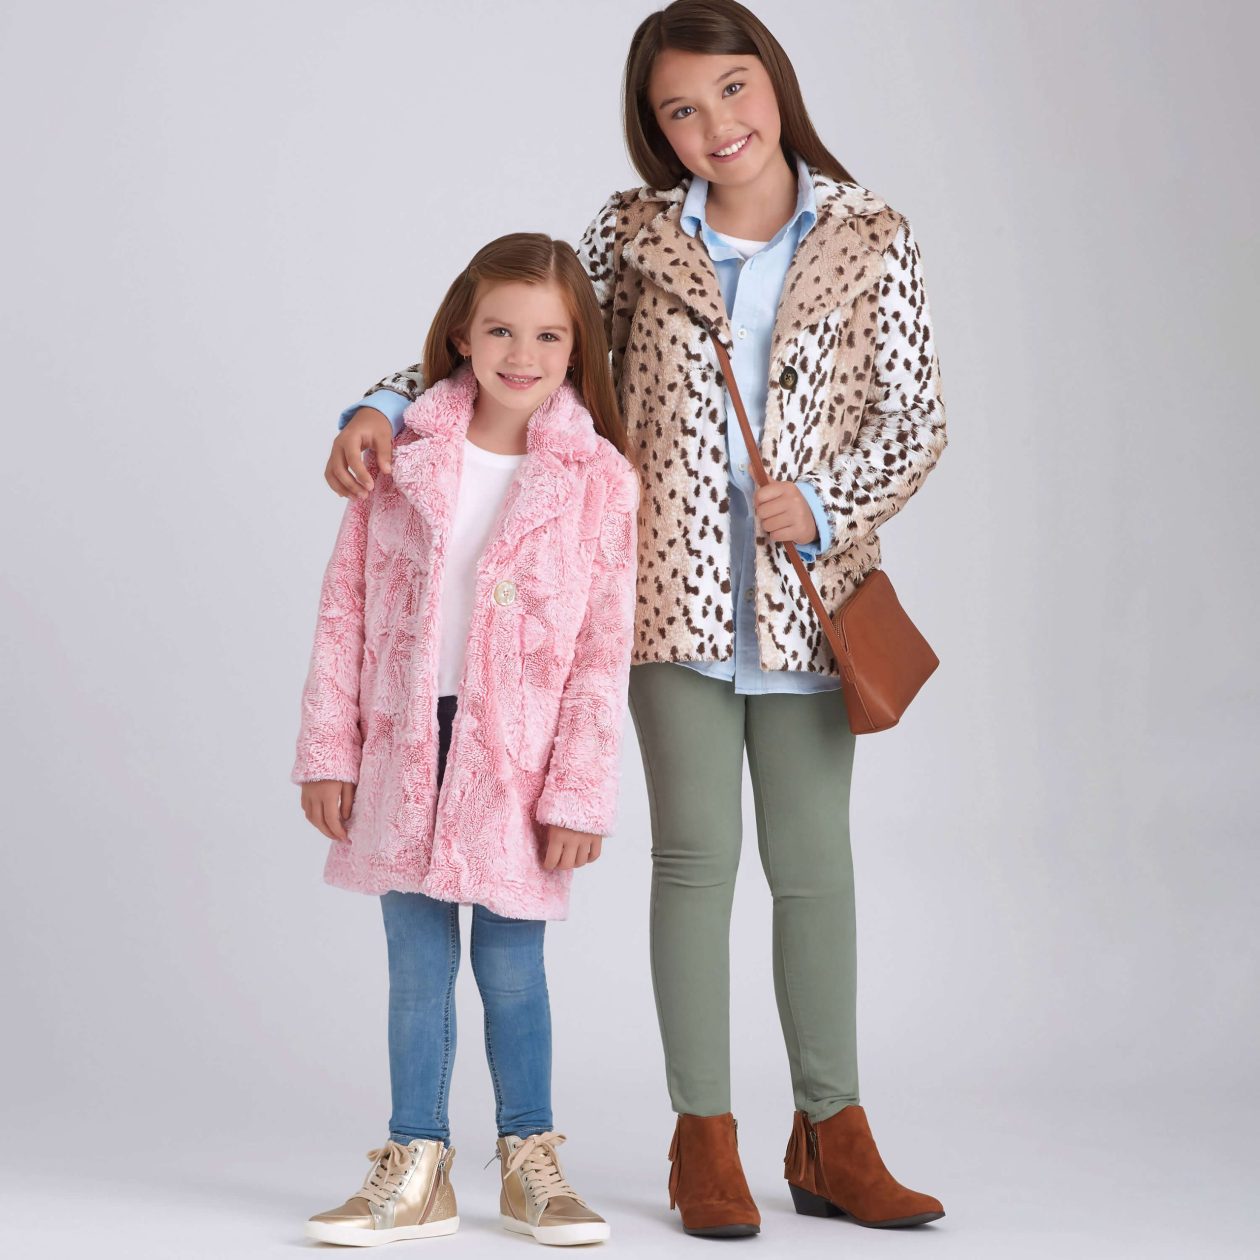 Simplicity Sewing Pattern S9027 Children's & Girls' Lined Coat